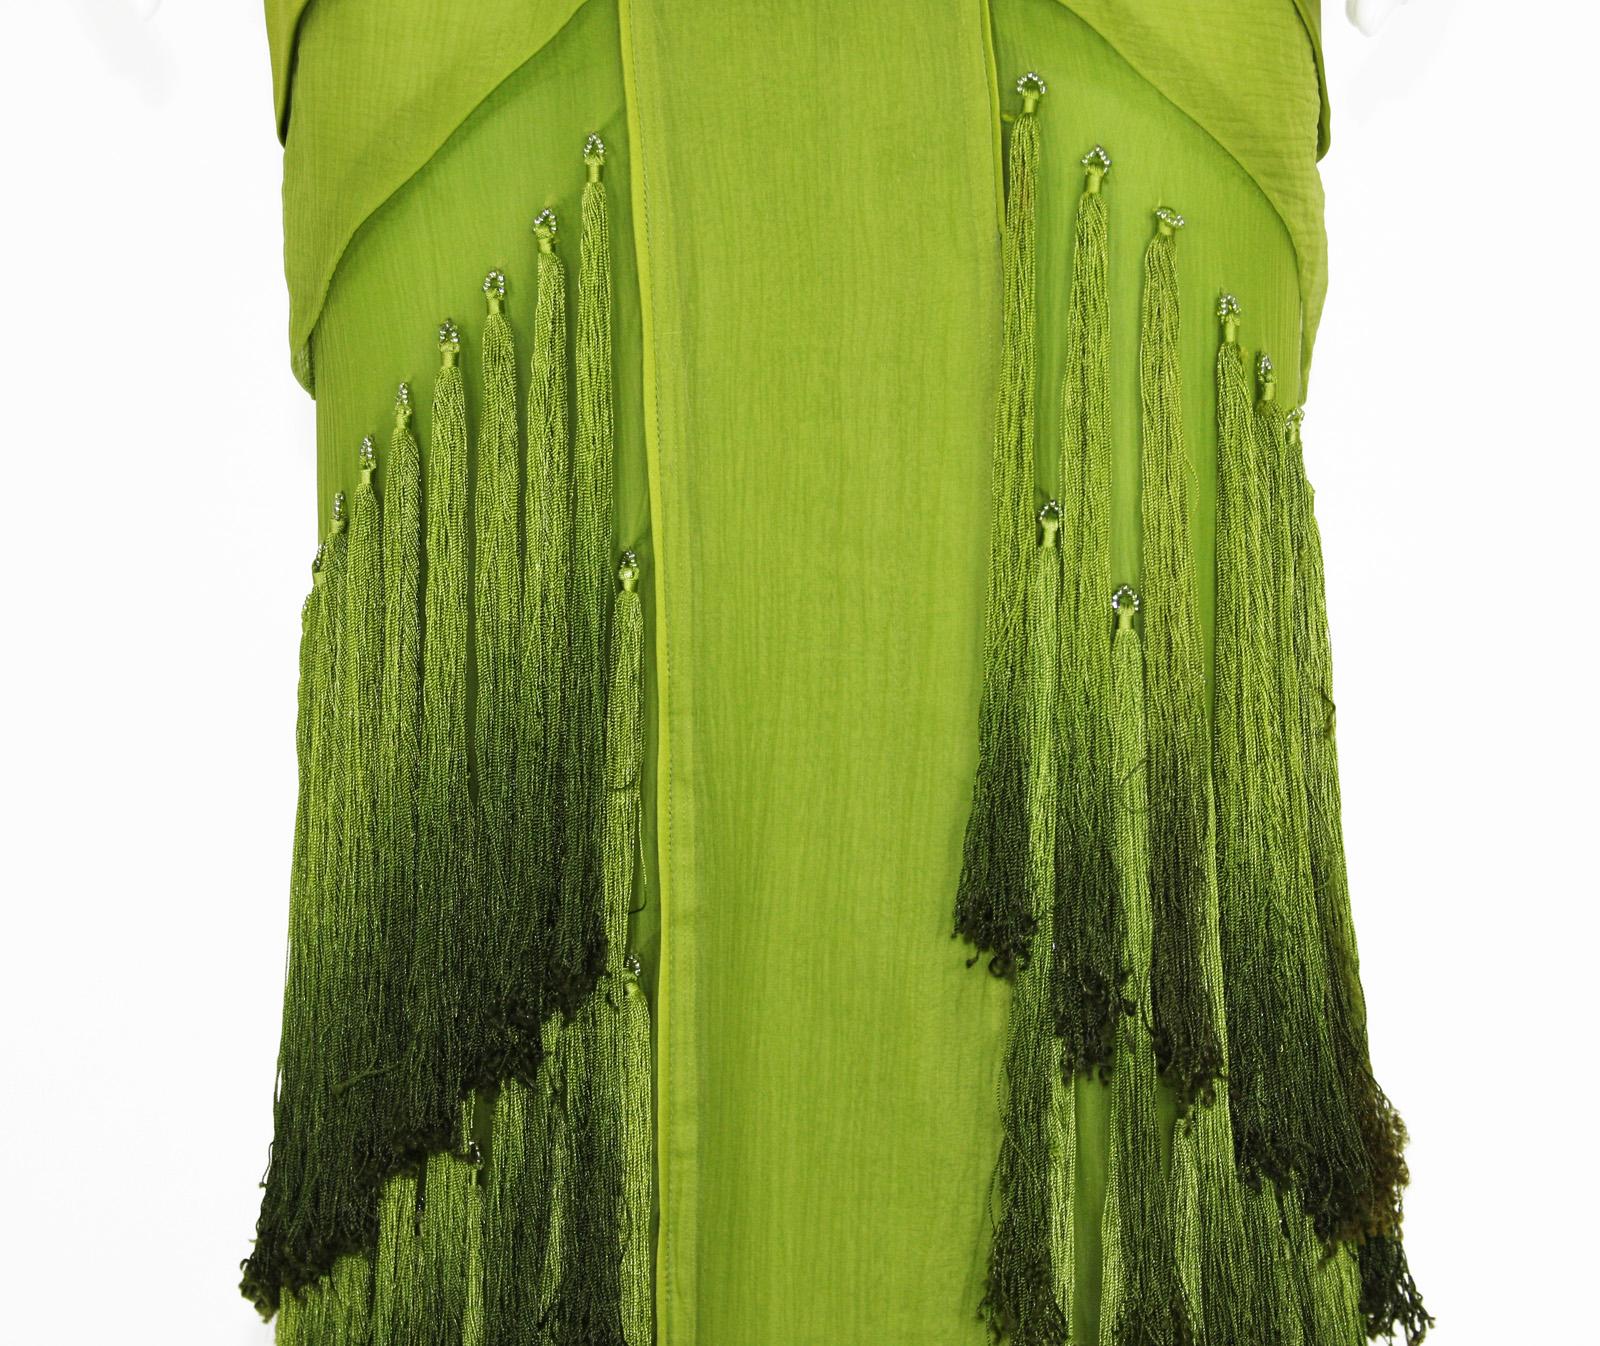 Tom Ford for Gucci 2004 F/W Collection Silk Green Tassel Dress Gown 40 - 4 1